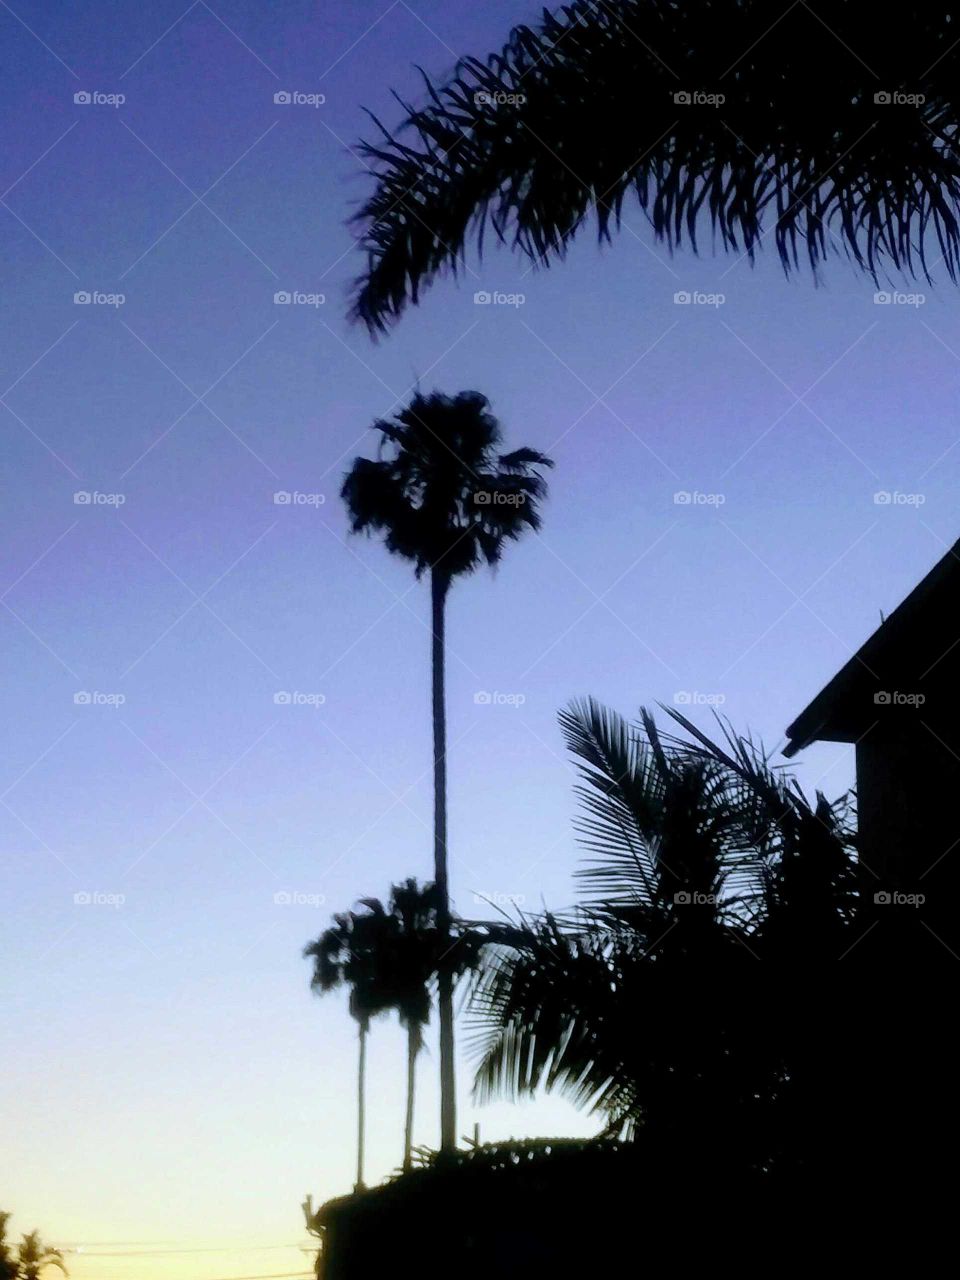 Silhouette of Palm Trees and Flora at Sunset  (stylized)